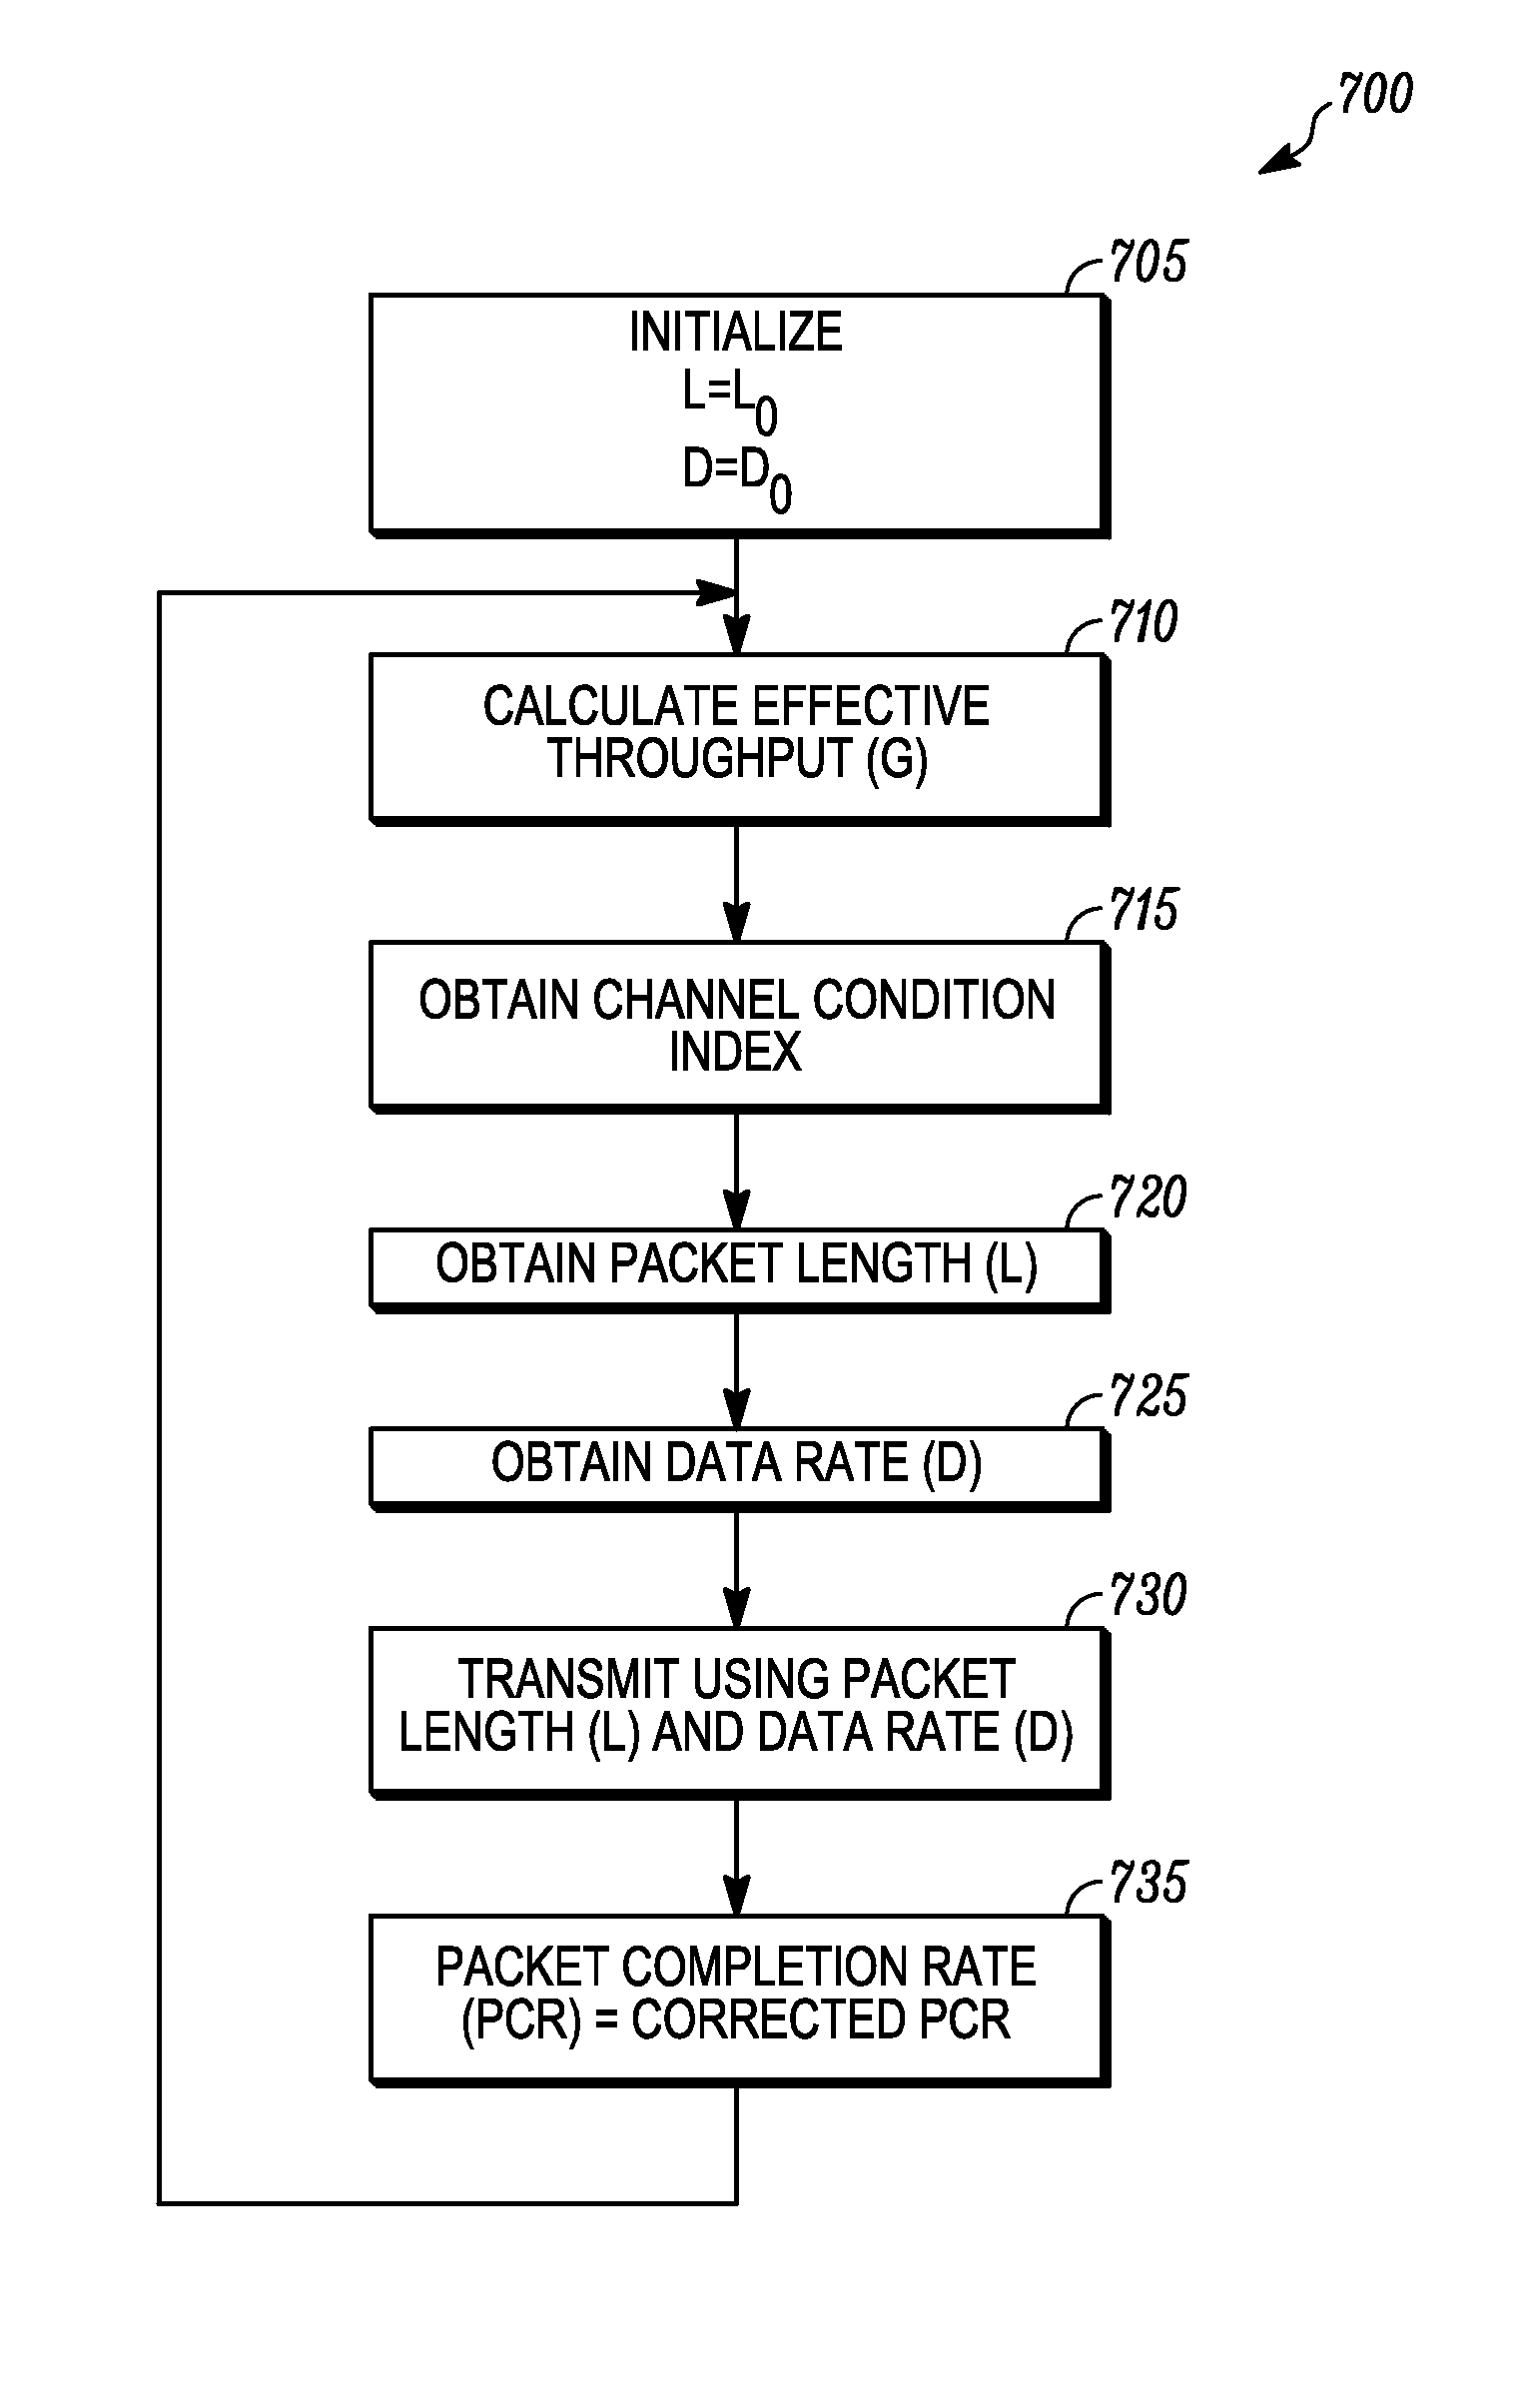 Method for determining data rate and packet length in mobile wireless networks